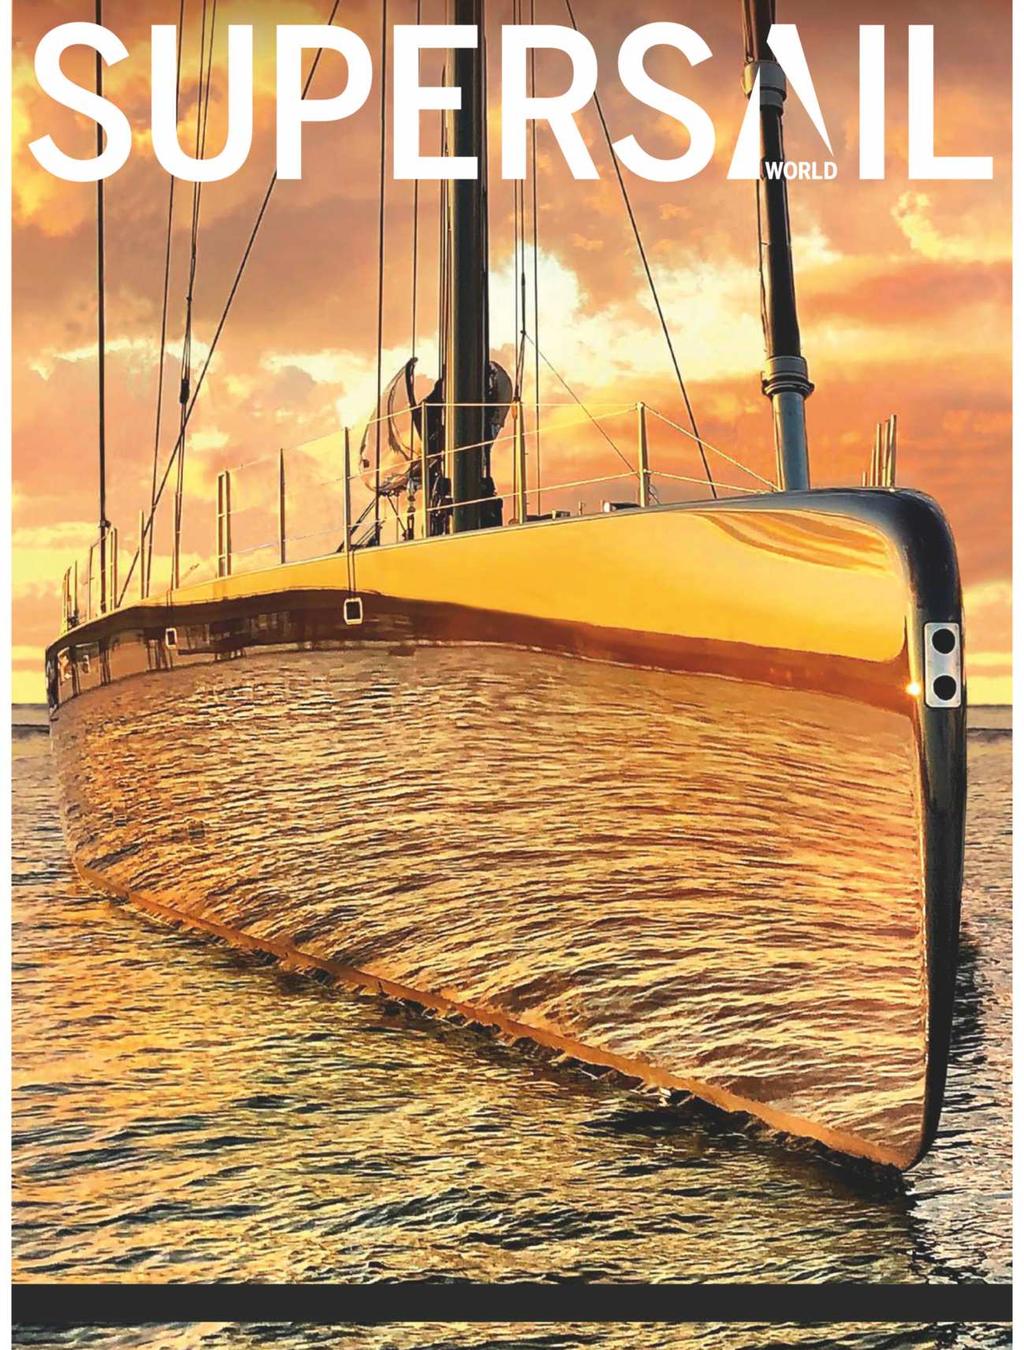 ISSUE 40 FREE WITH YACHTING WORLD * SHOWCASE